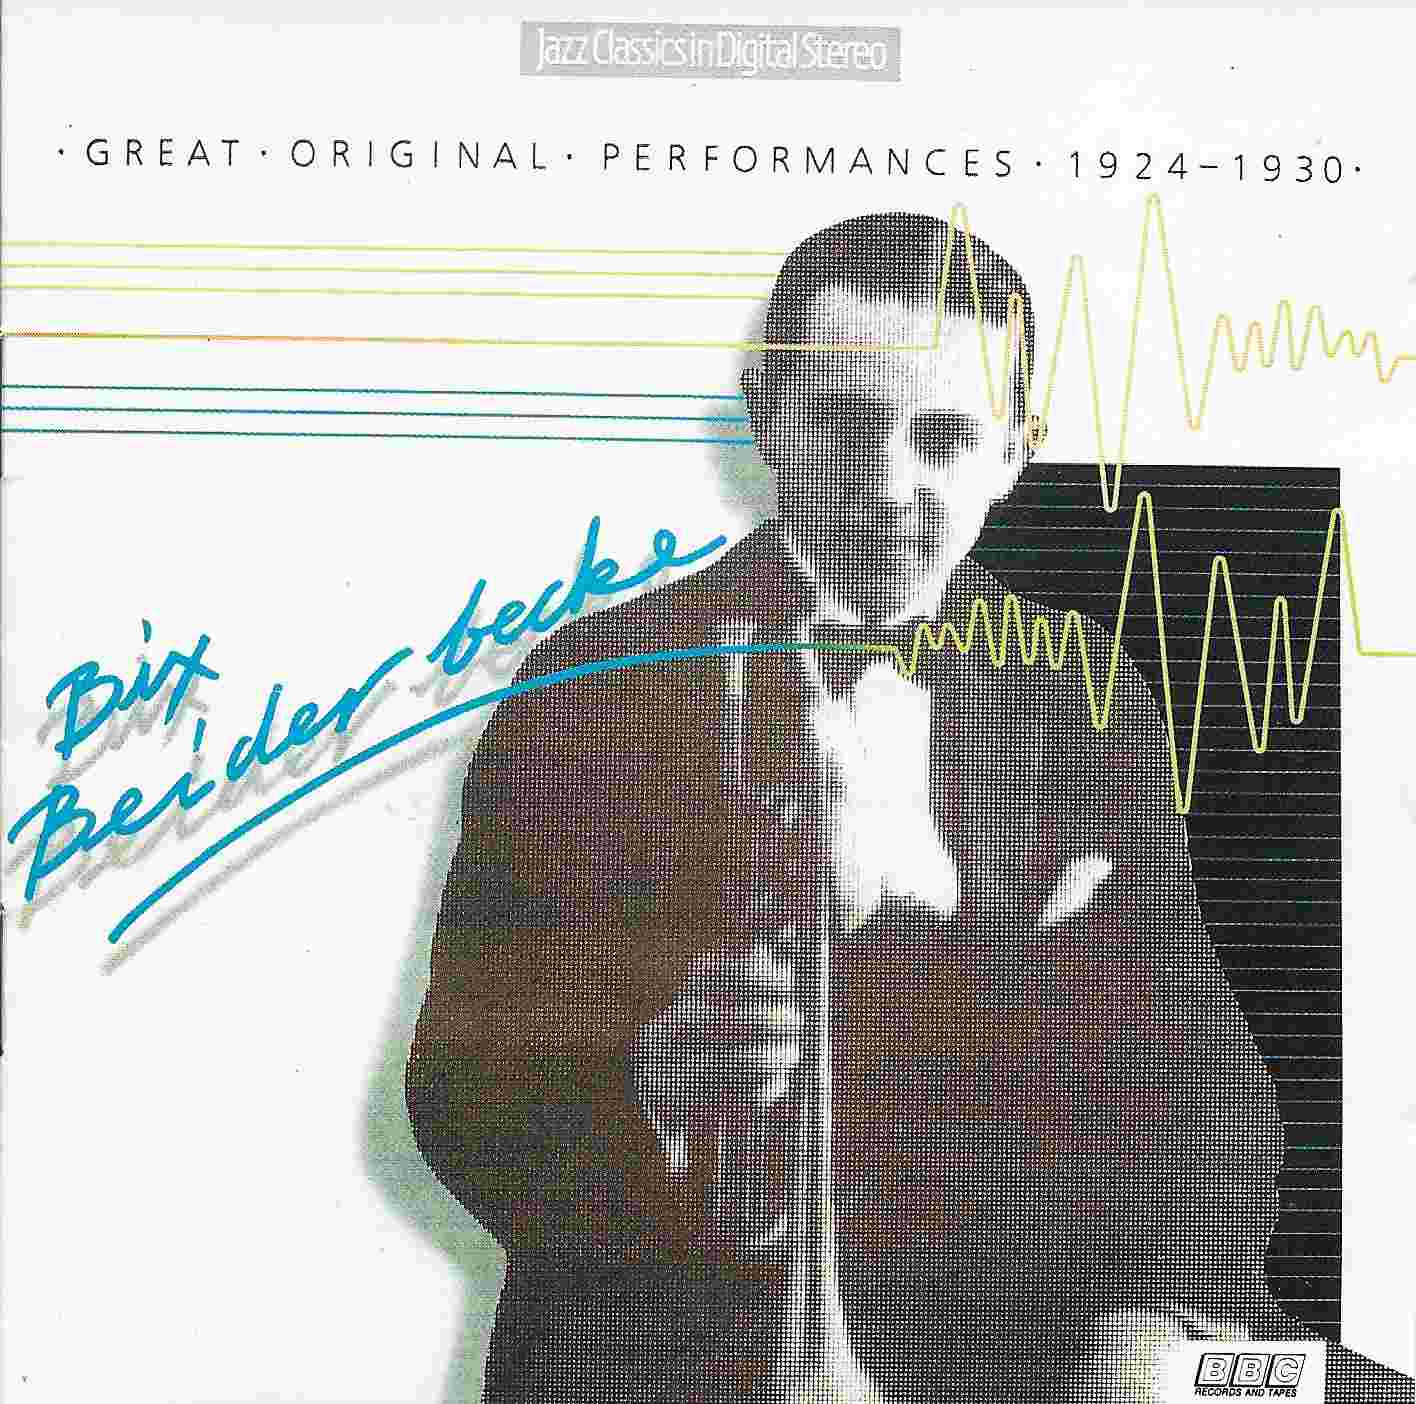 Picture of BBCCD601 Jazz Classics - Bix Beiderbecke by artist Bix Beiderbecke from the BBC records and Tapes library